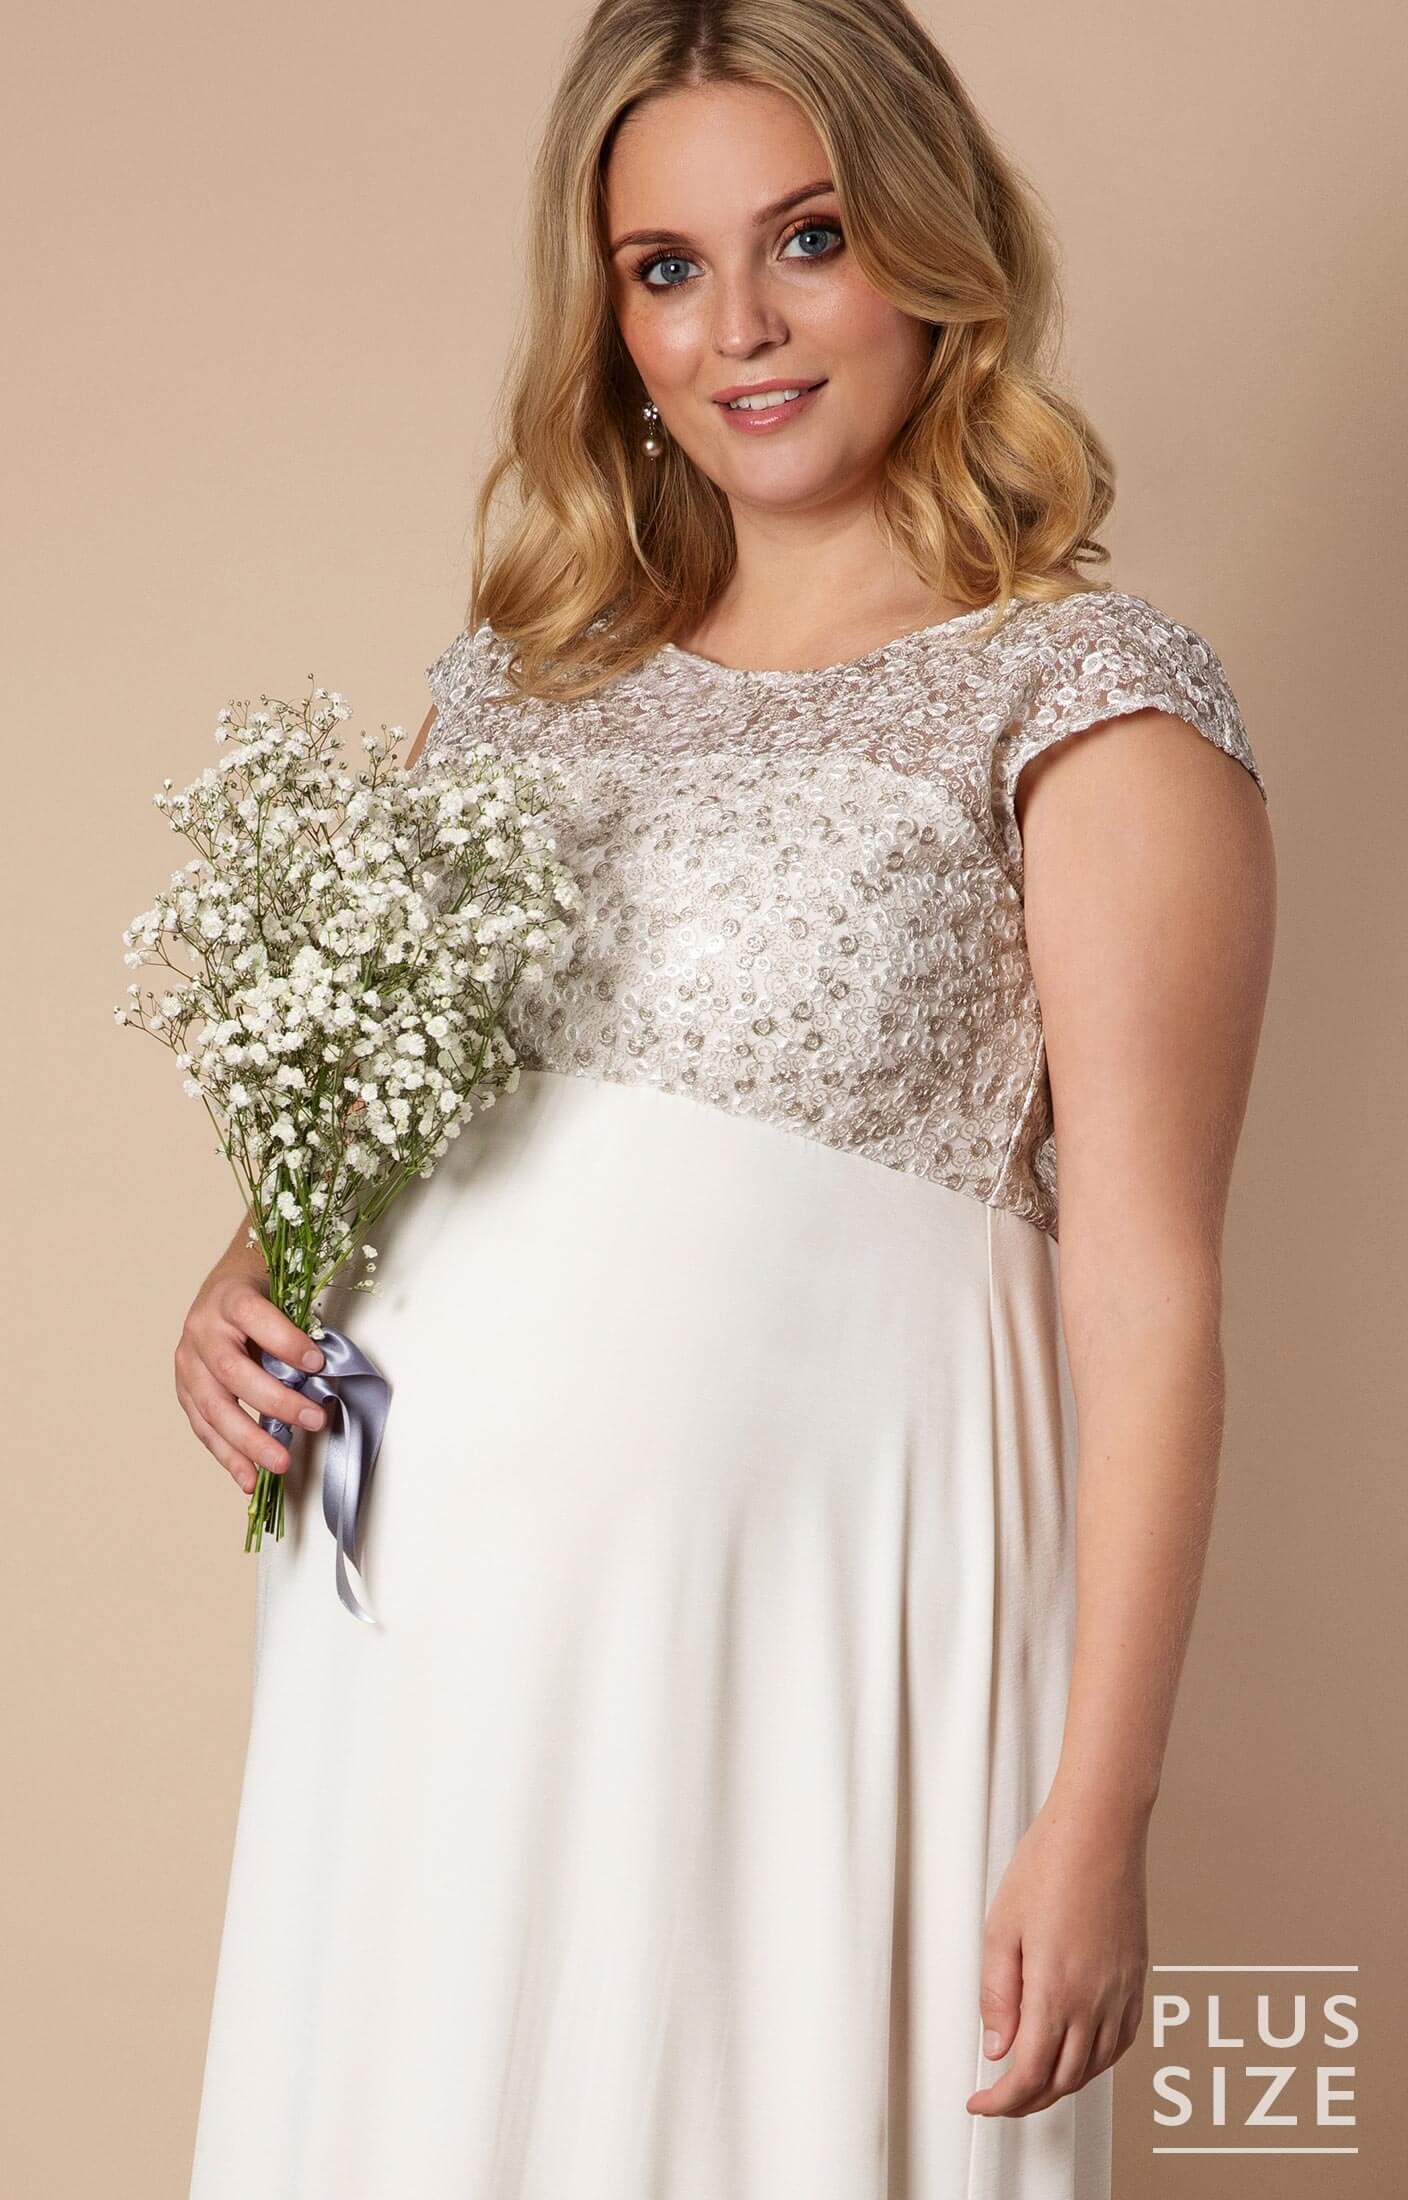 Mia Plus Size Maternity Wedding Gown in Ivory